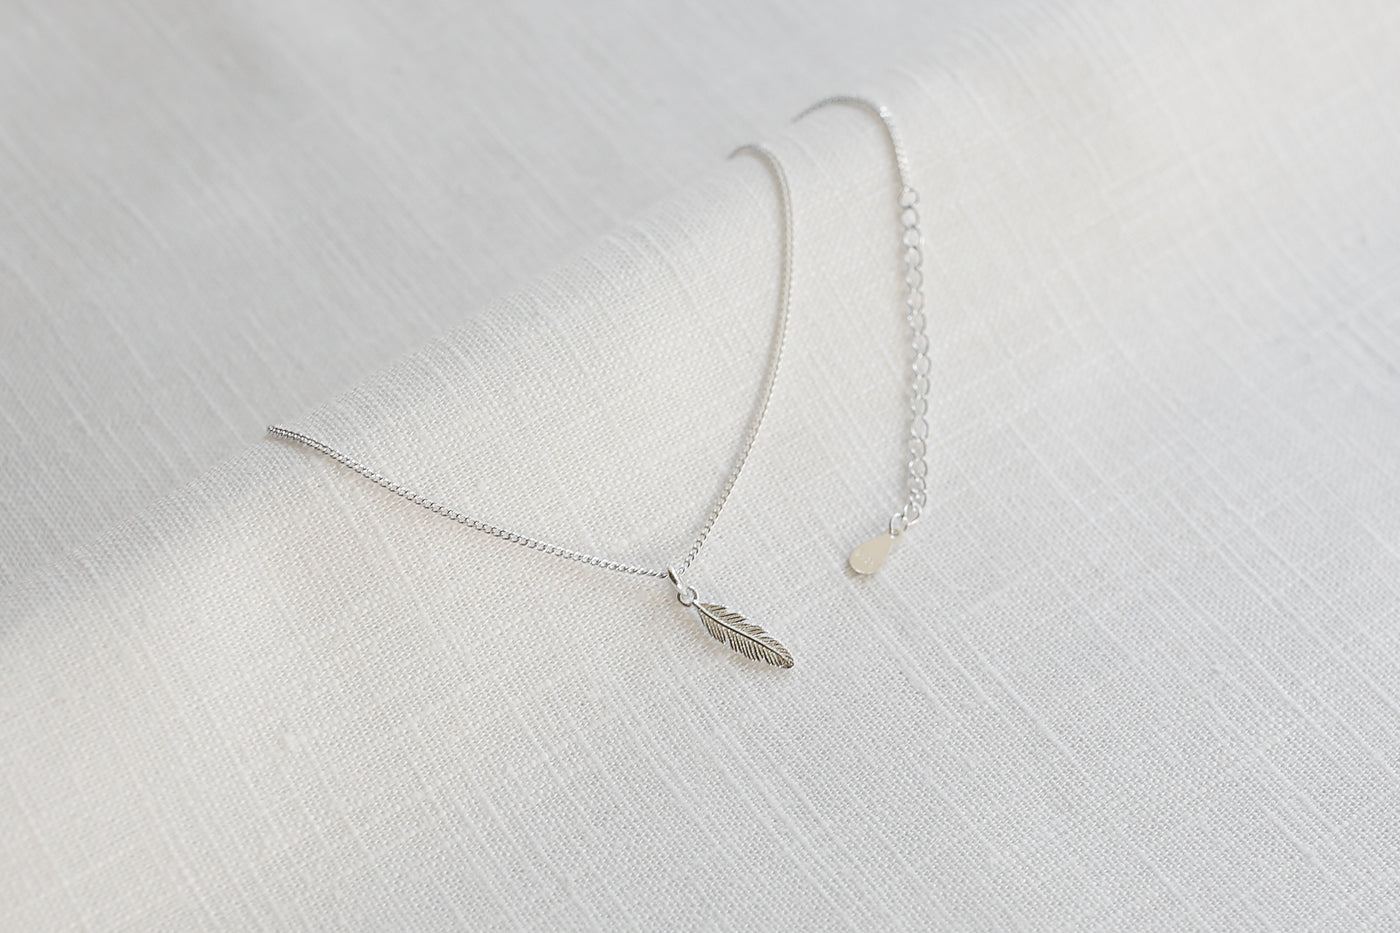 Sterling silver necklace with feather pendant and Happiness greeting card